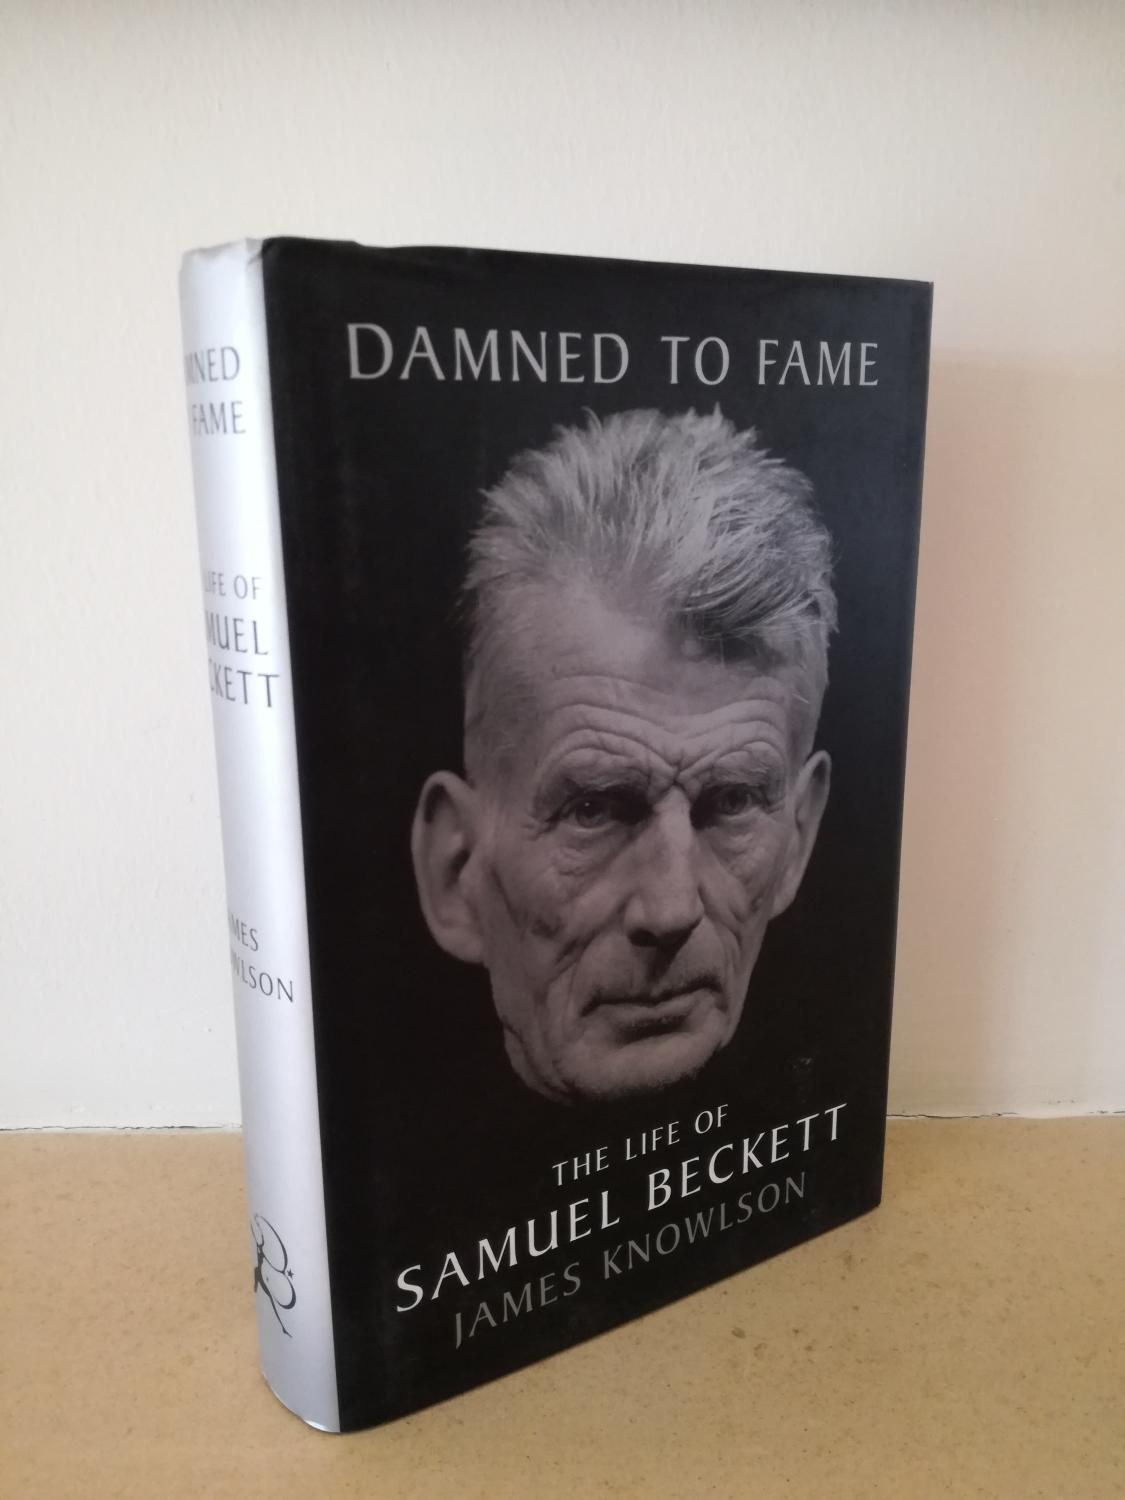 Damned to Fame The Life of Samuel Beckett by James Knowlson Near Fine